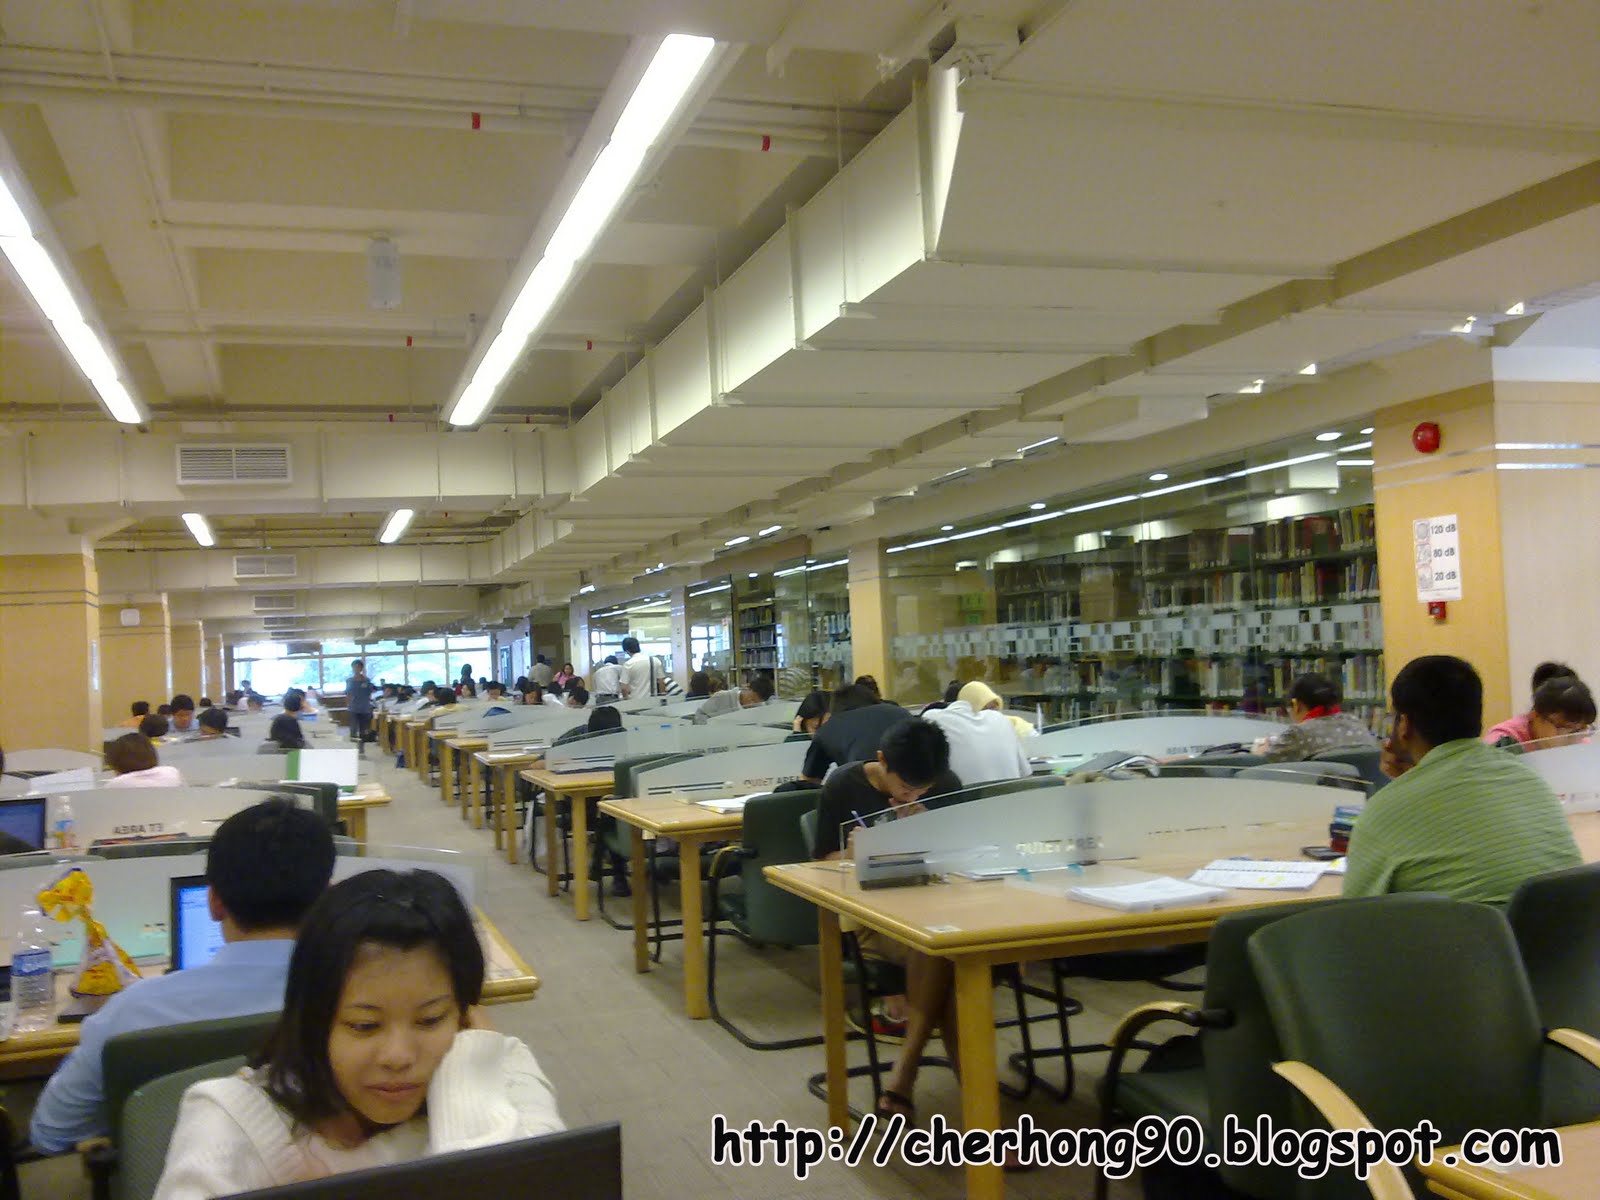 Study trip to the library XD | LUKEYisHandsome.